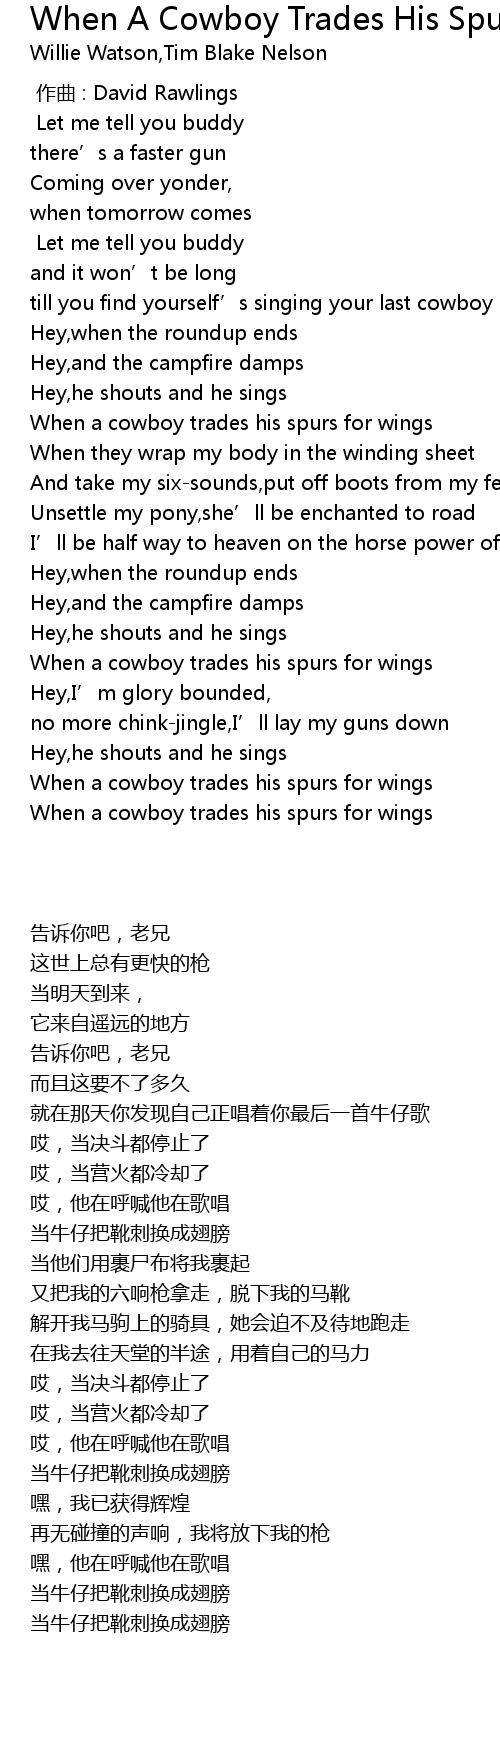 When A Cowboy Trades His Spurs For Wings - Official Lyric Video